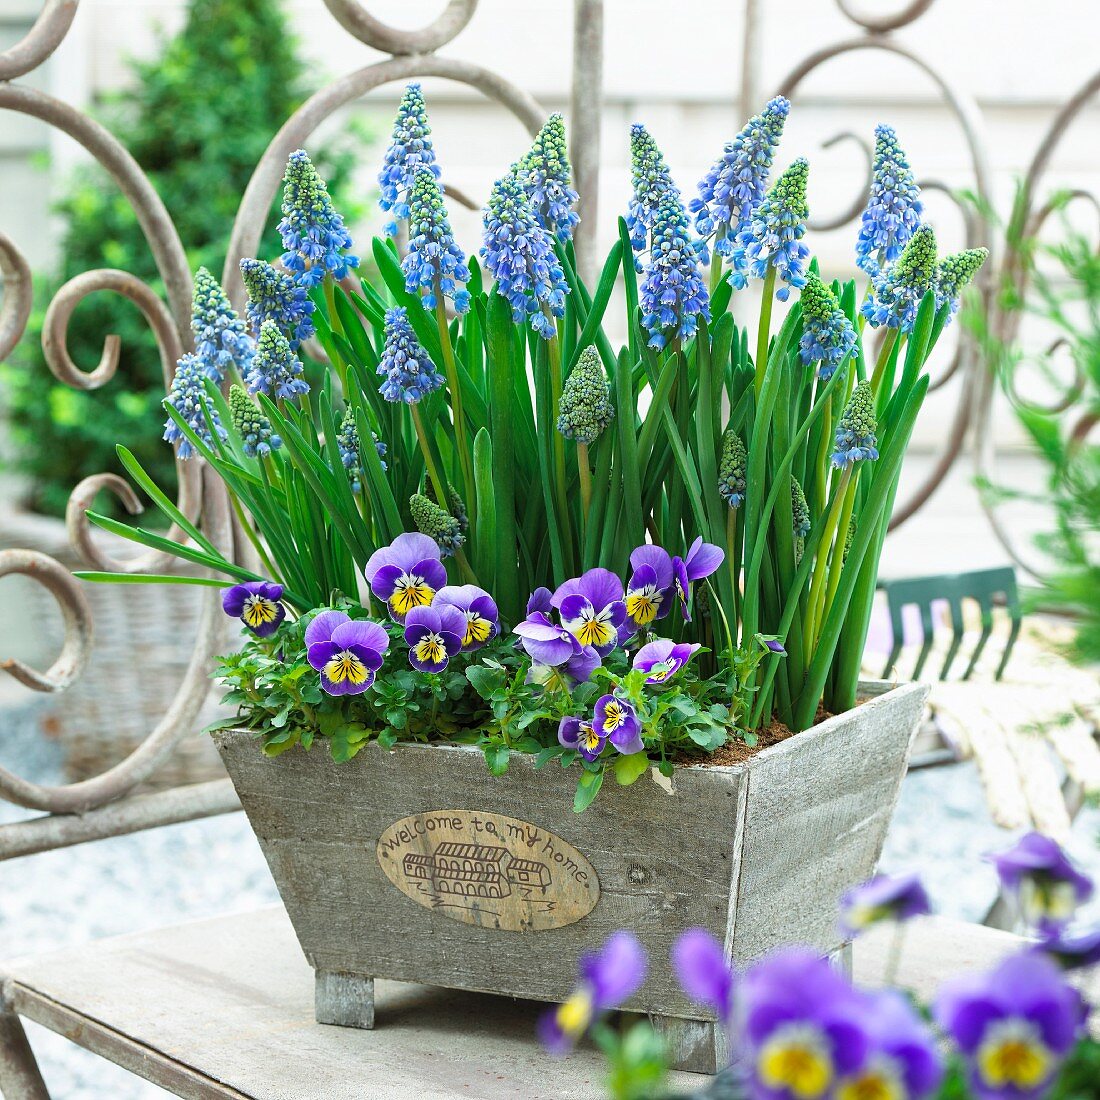 Blue grape hyacinth and horned pansies in a plant container